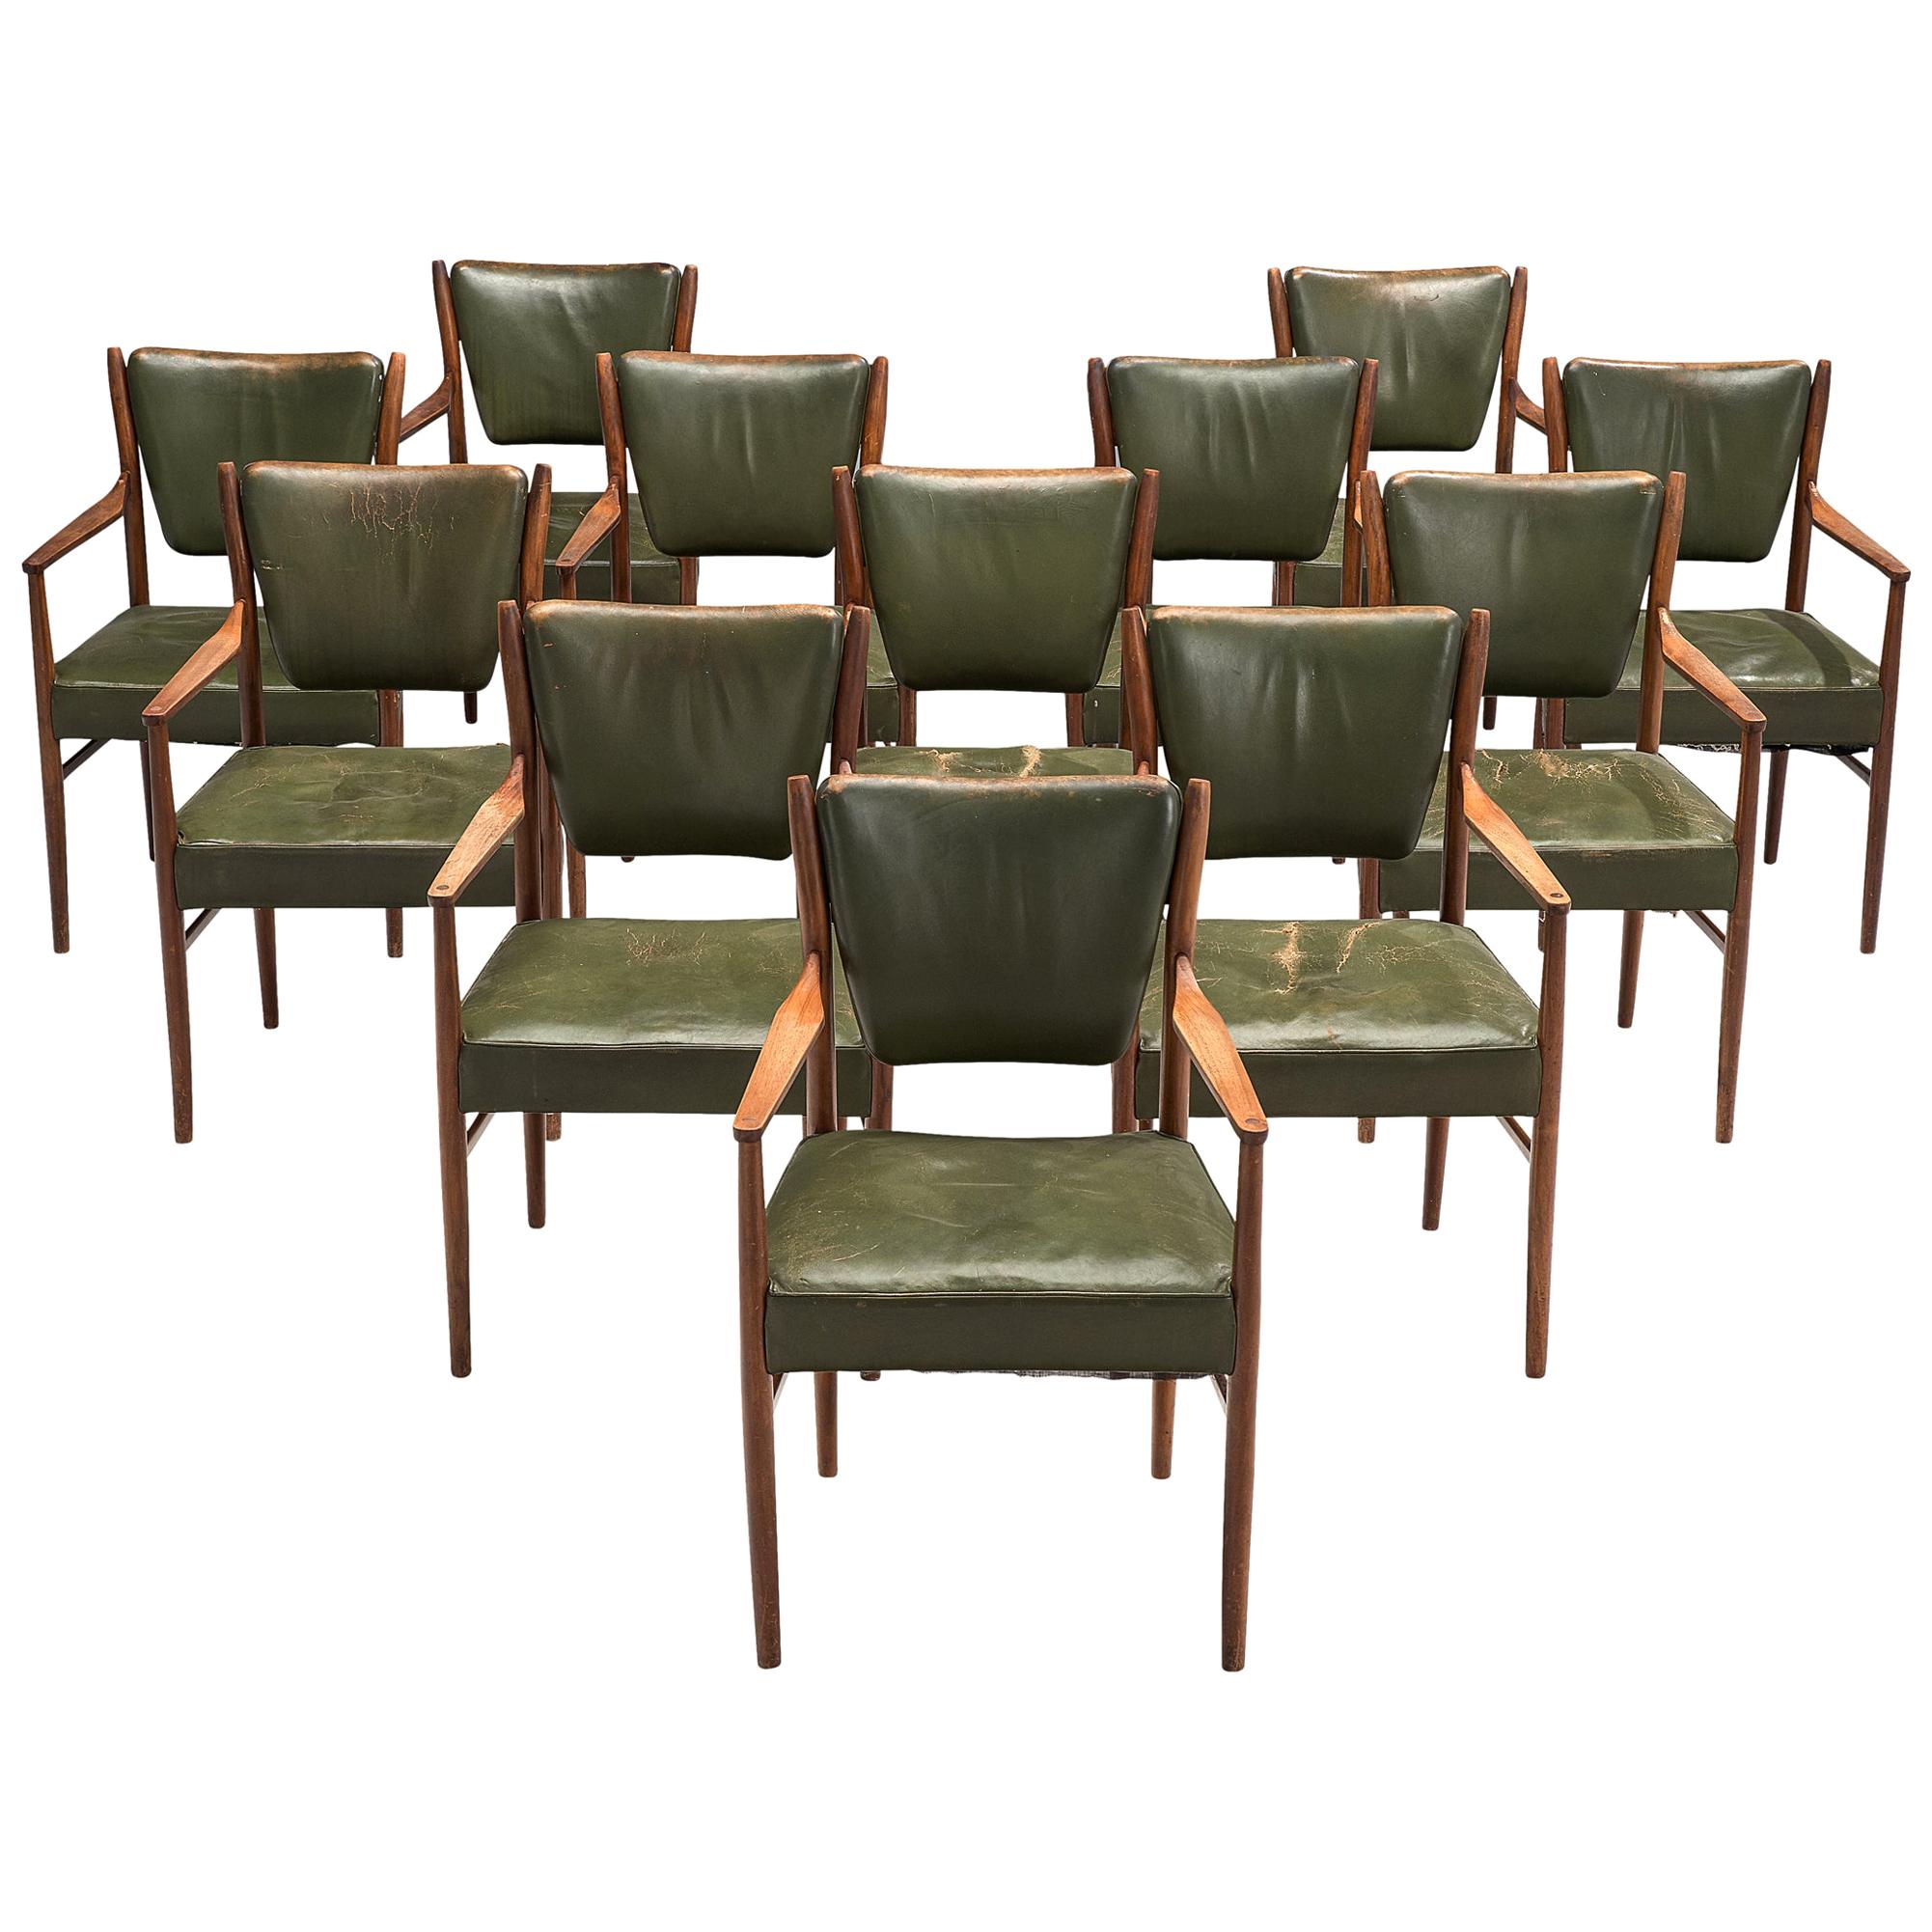 Danish Set Of Twelve Dining Chairs In Olive Green Leather For Sale At 1stdibs